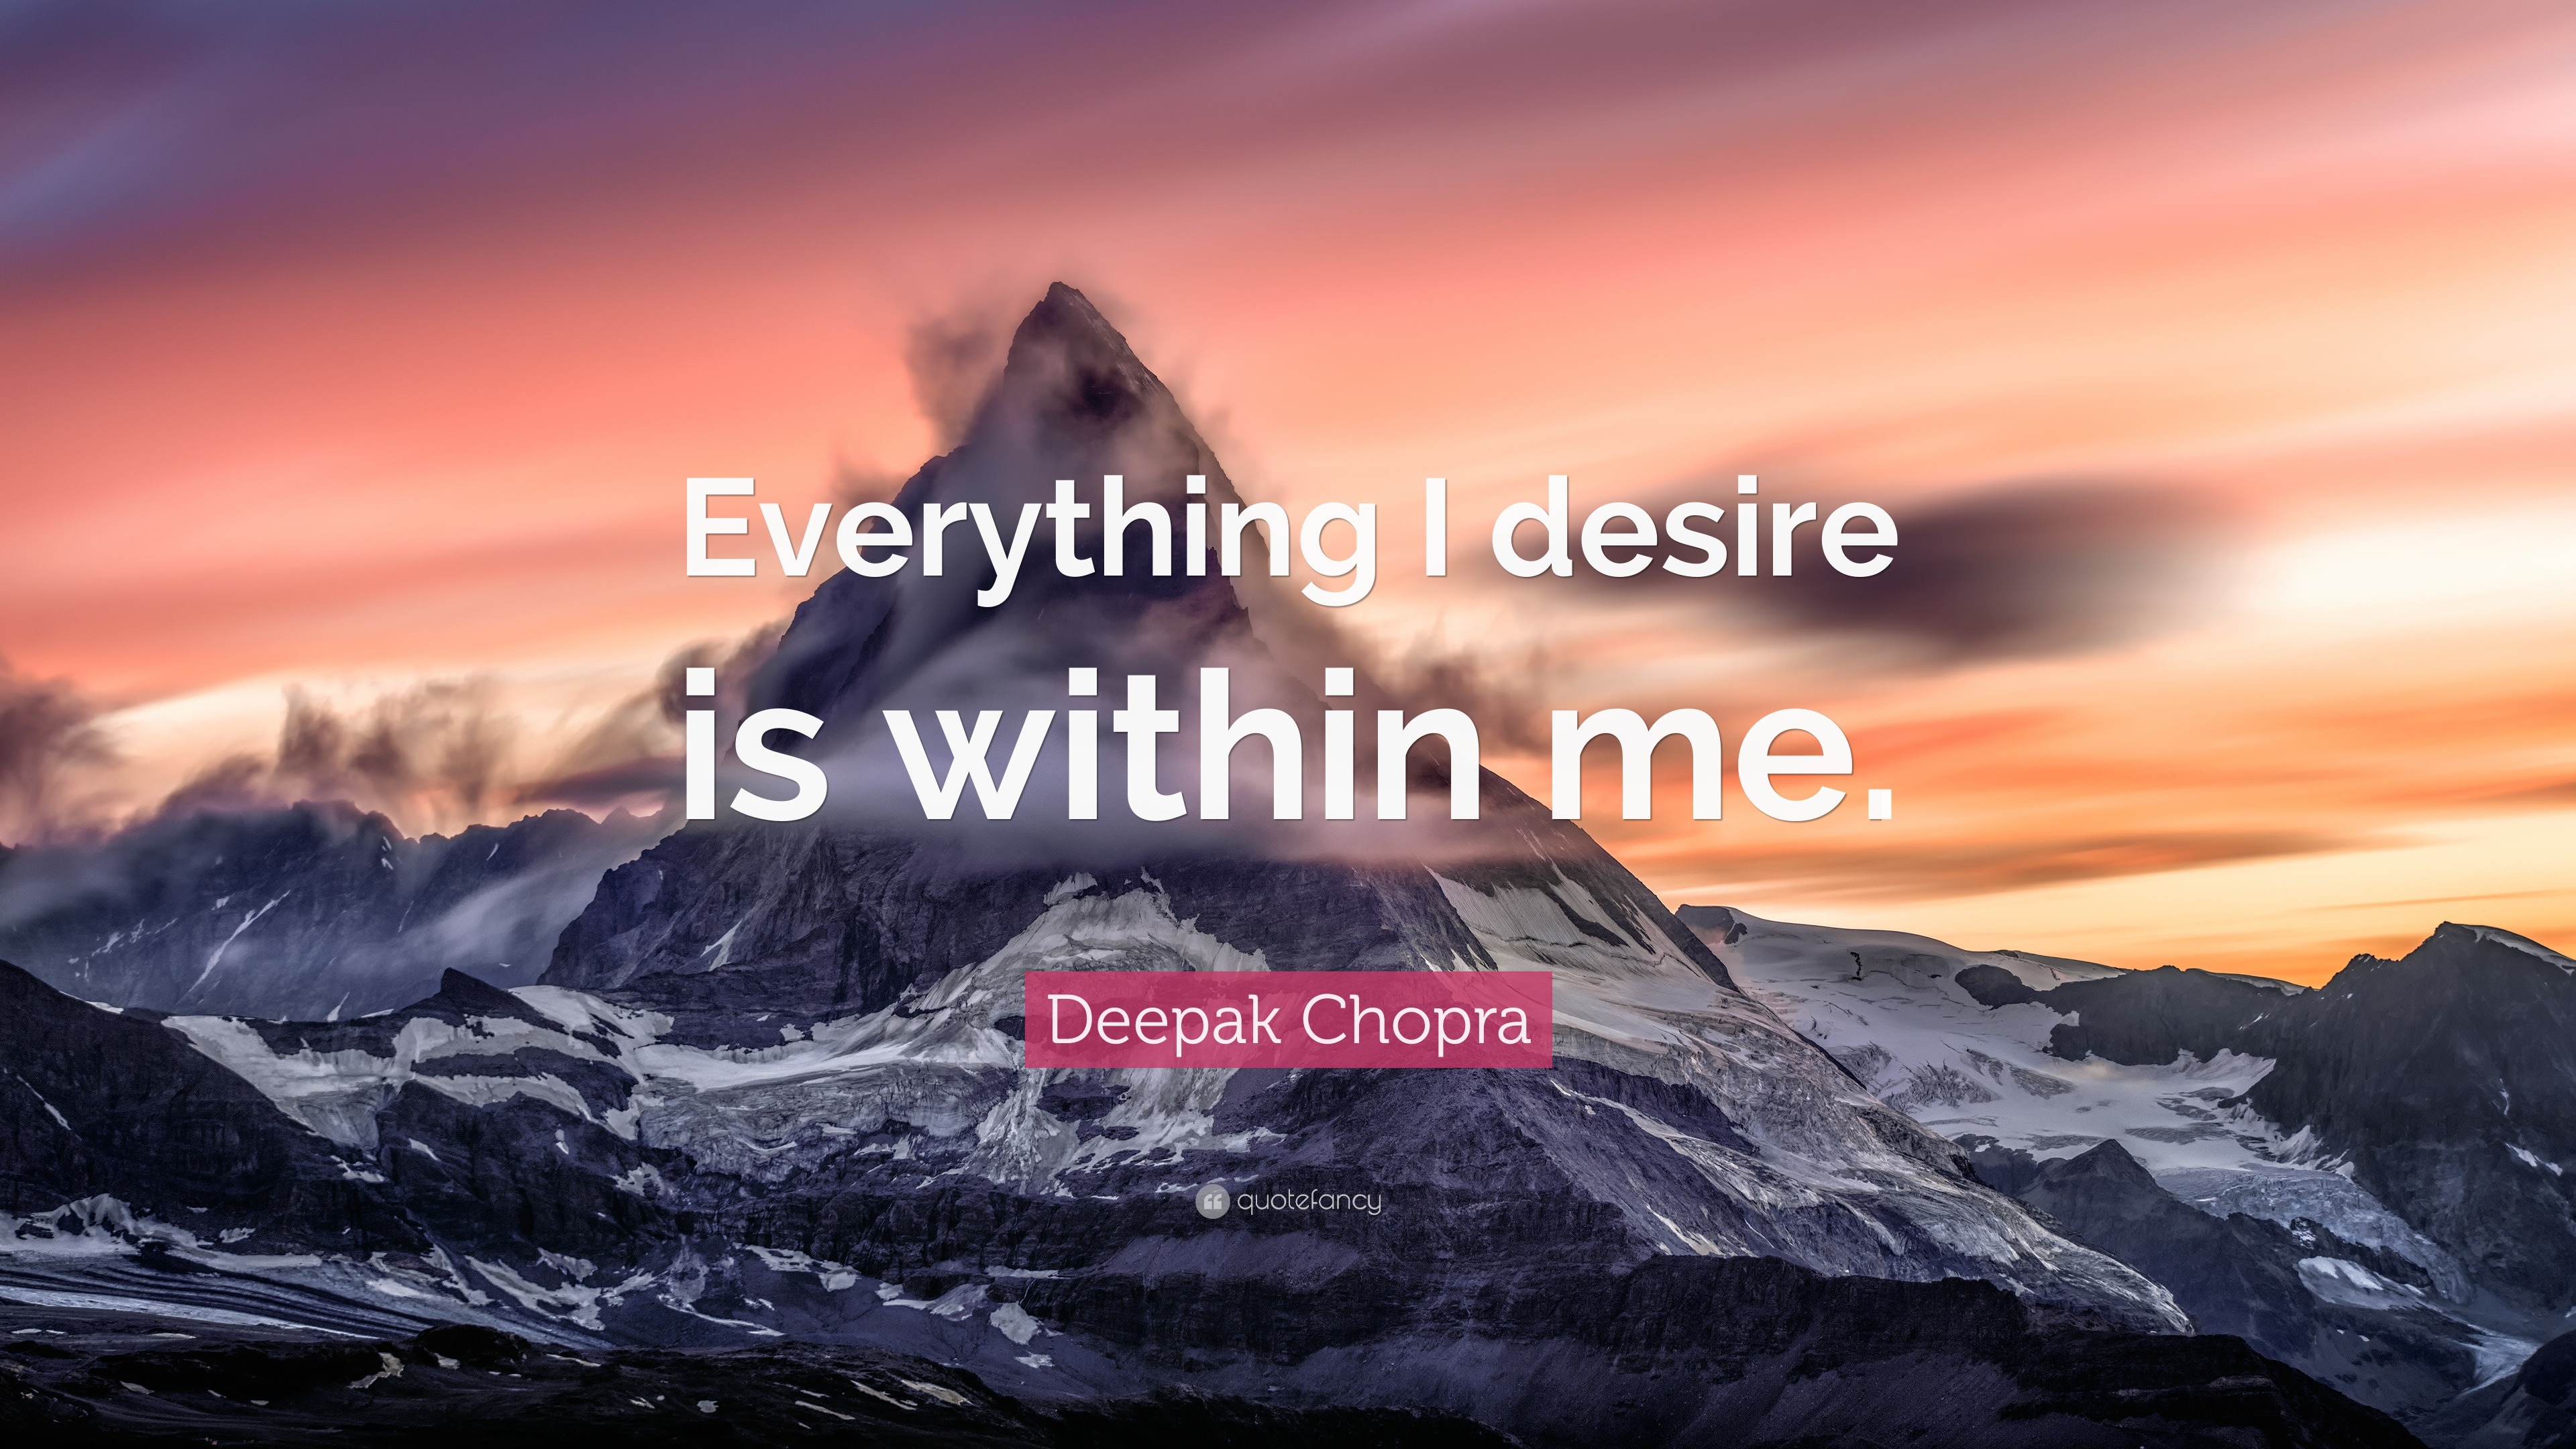 Deepak Chopra Quote: “Everything I desire is within me.” (12 ...